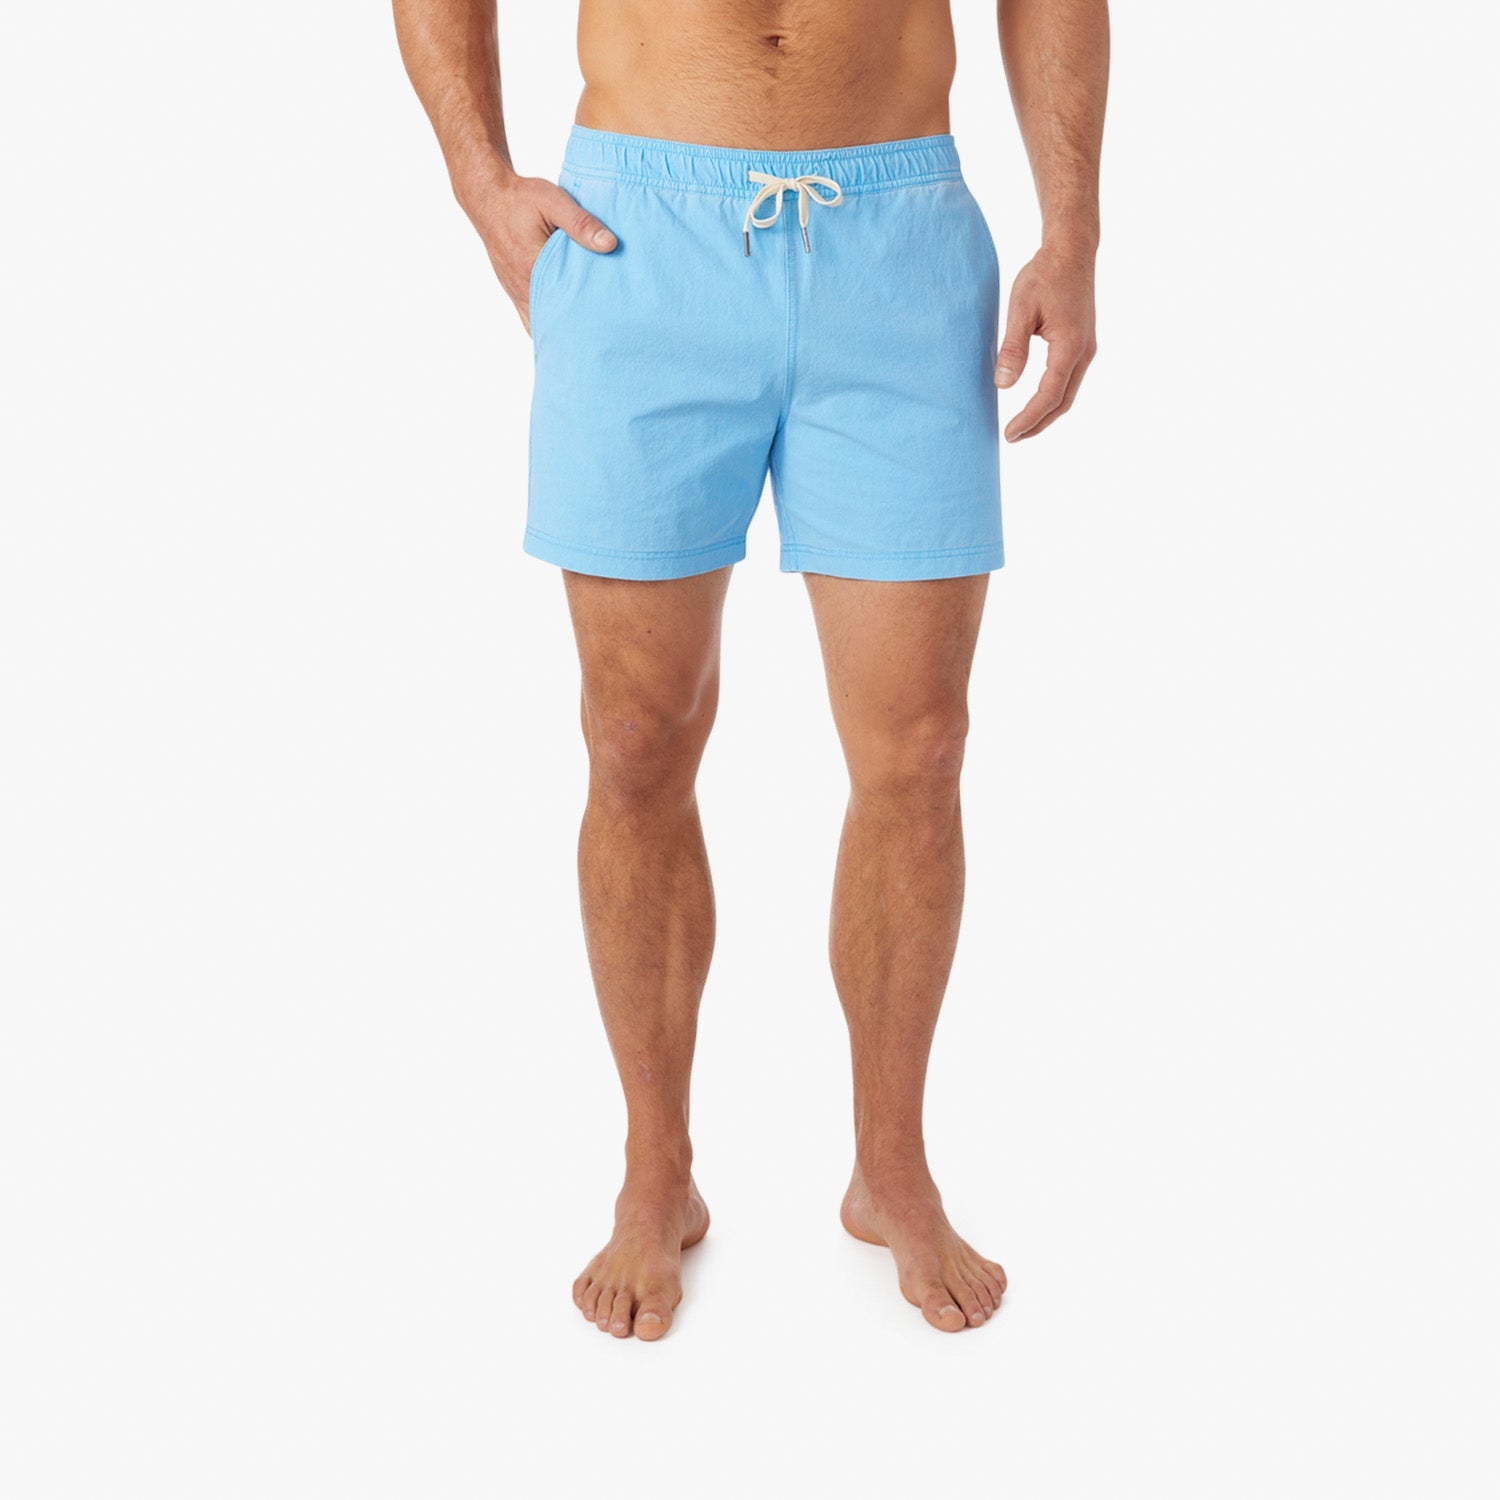 The Bungalow Trunk 5" - Blue Grotto Blue Grotto